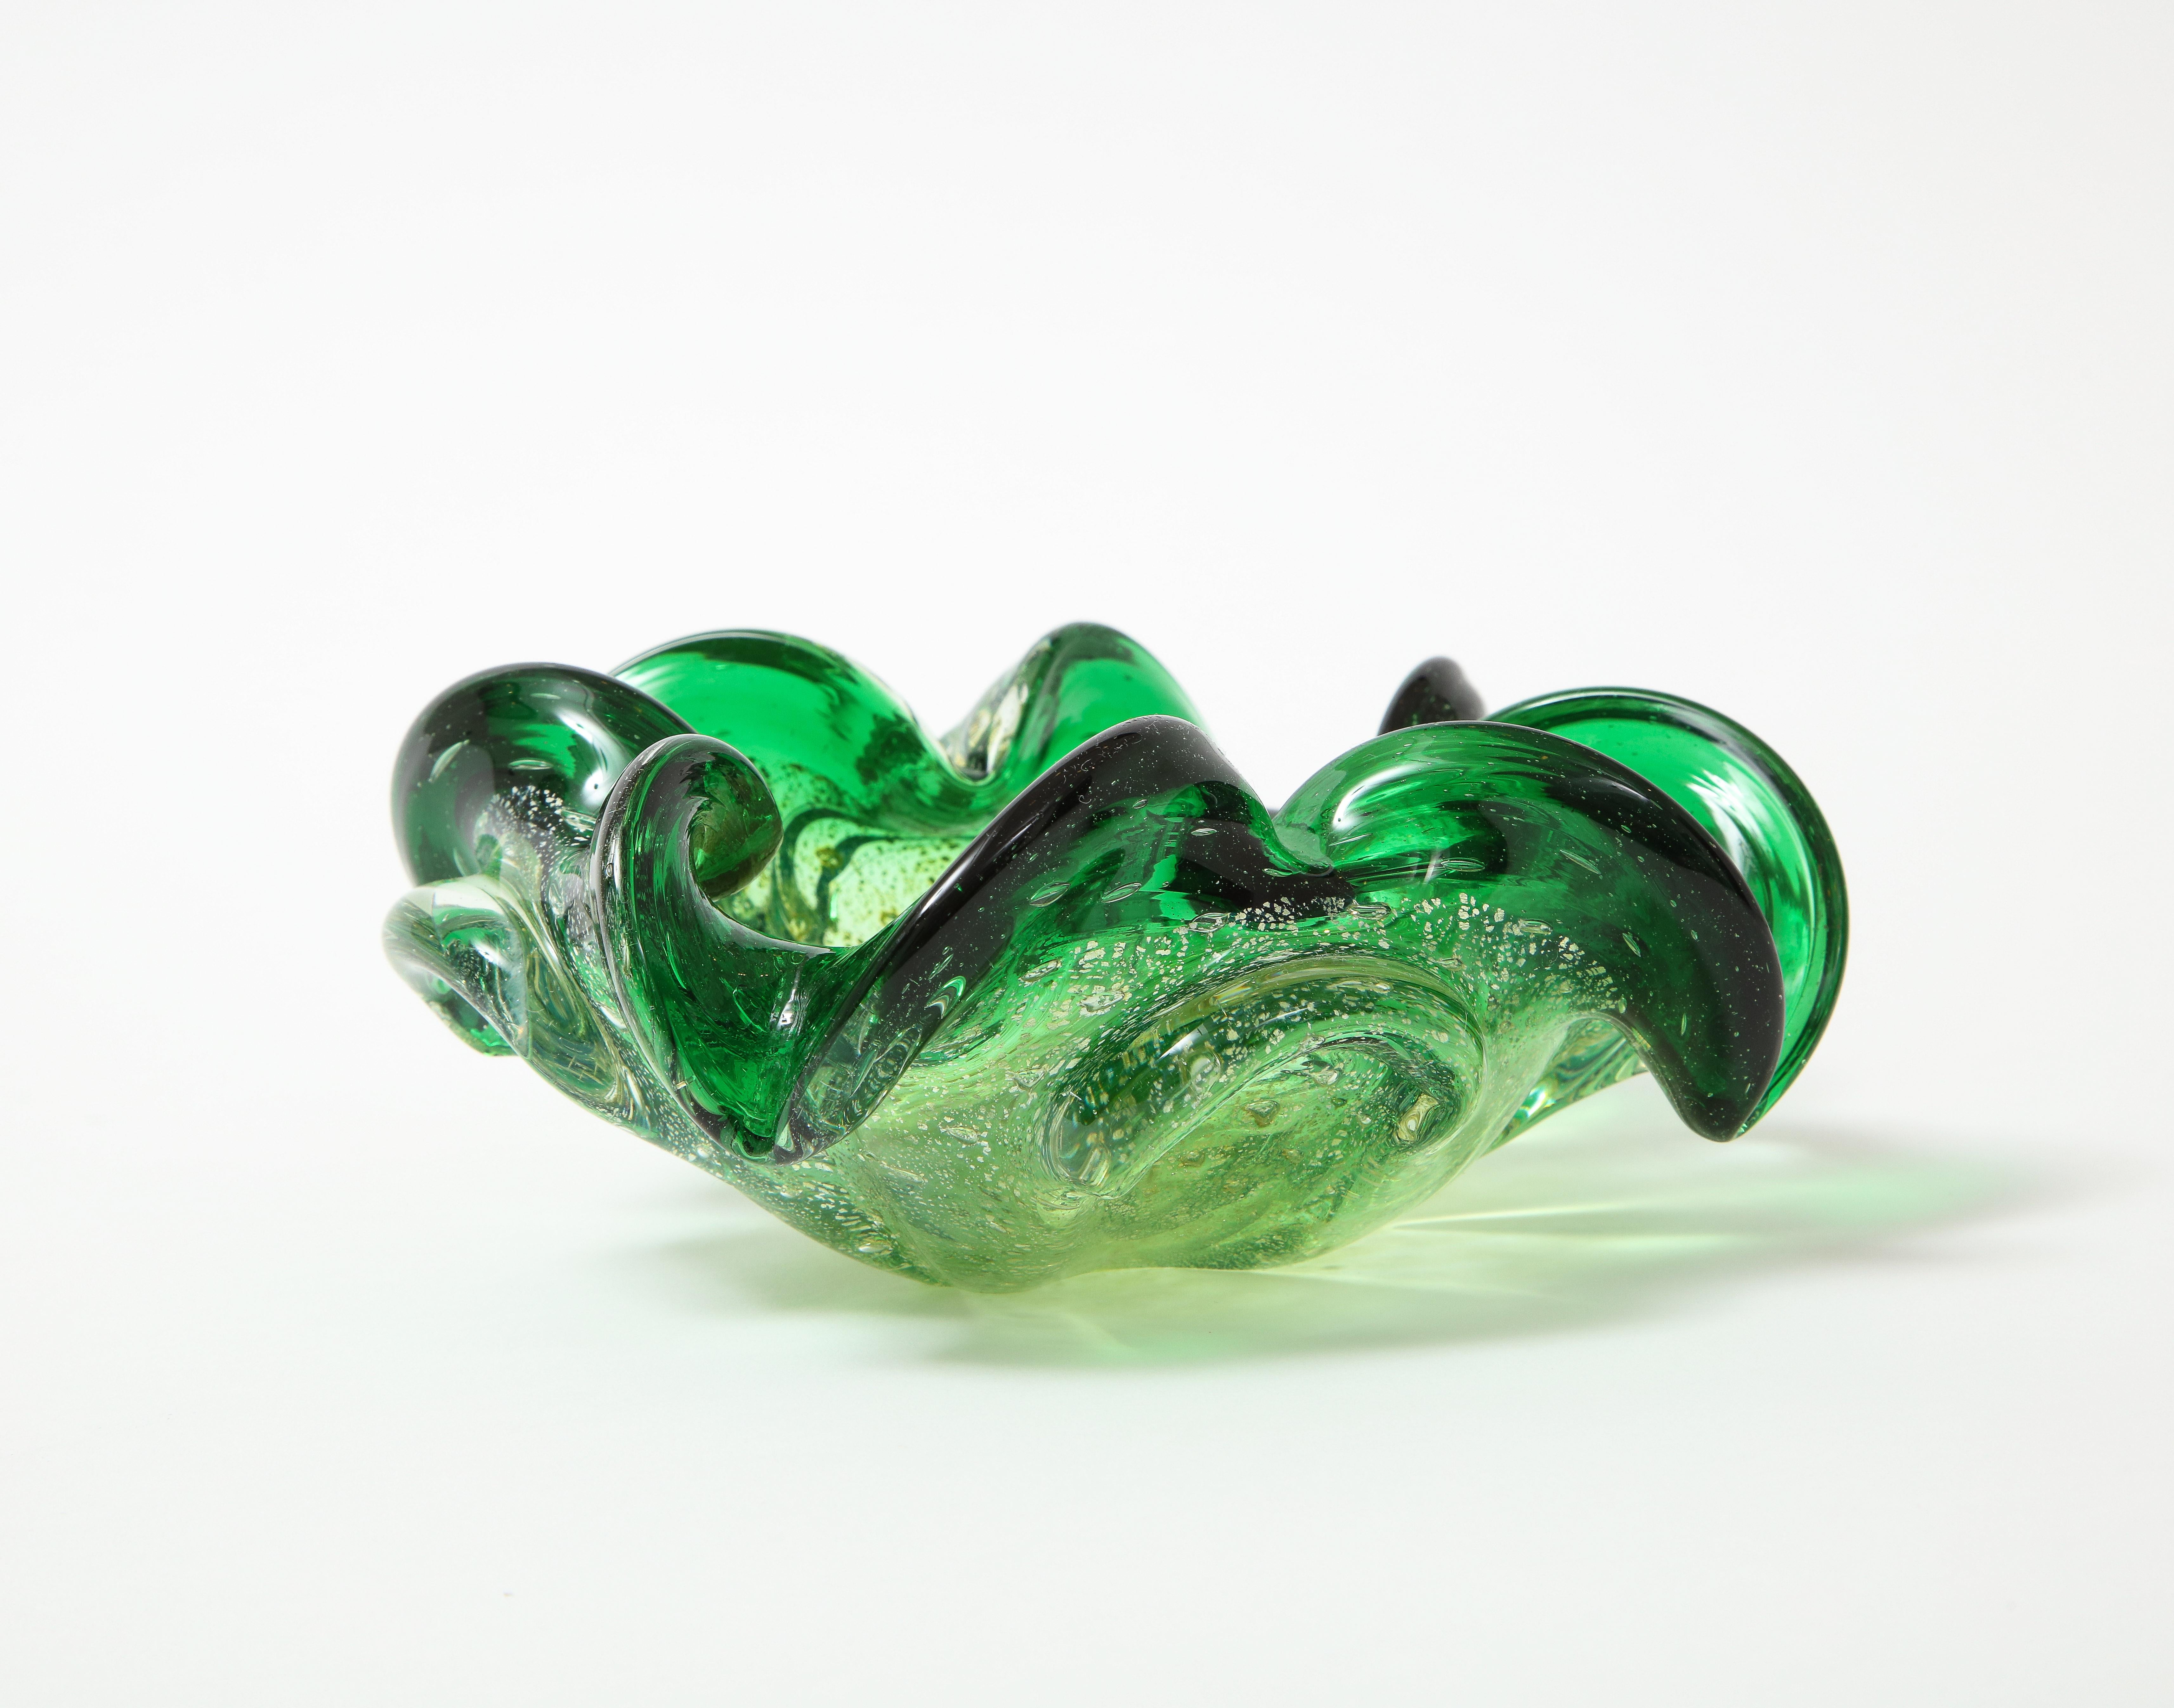 Italian mid century emerald green murano glass vessel with lettuce edge and gold leaf inclusions. A beautiful catch-all or soap dish.